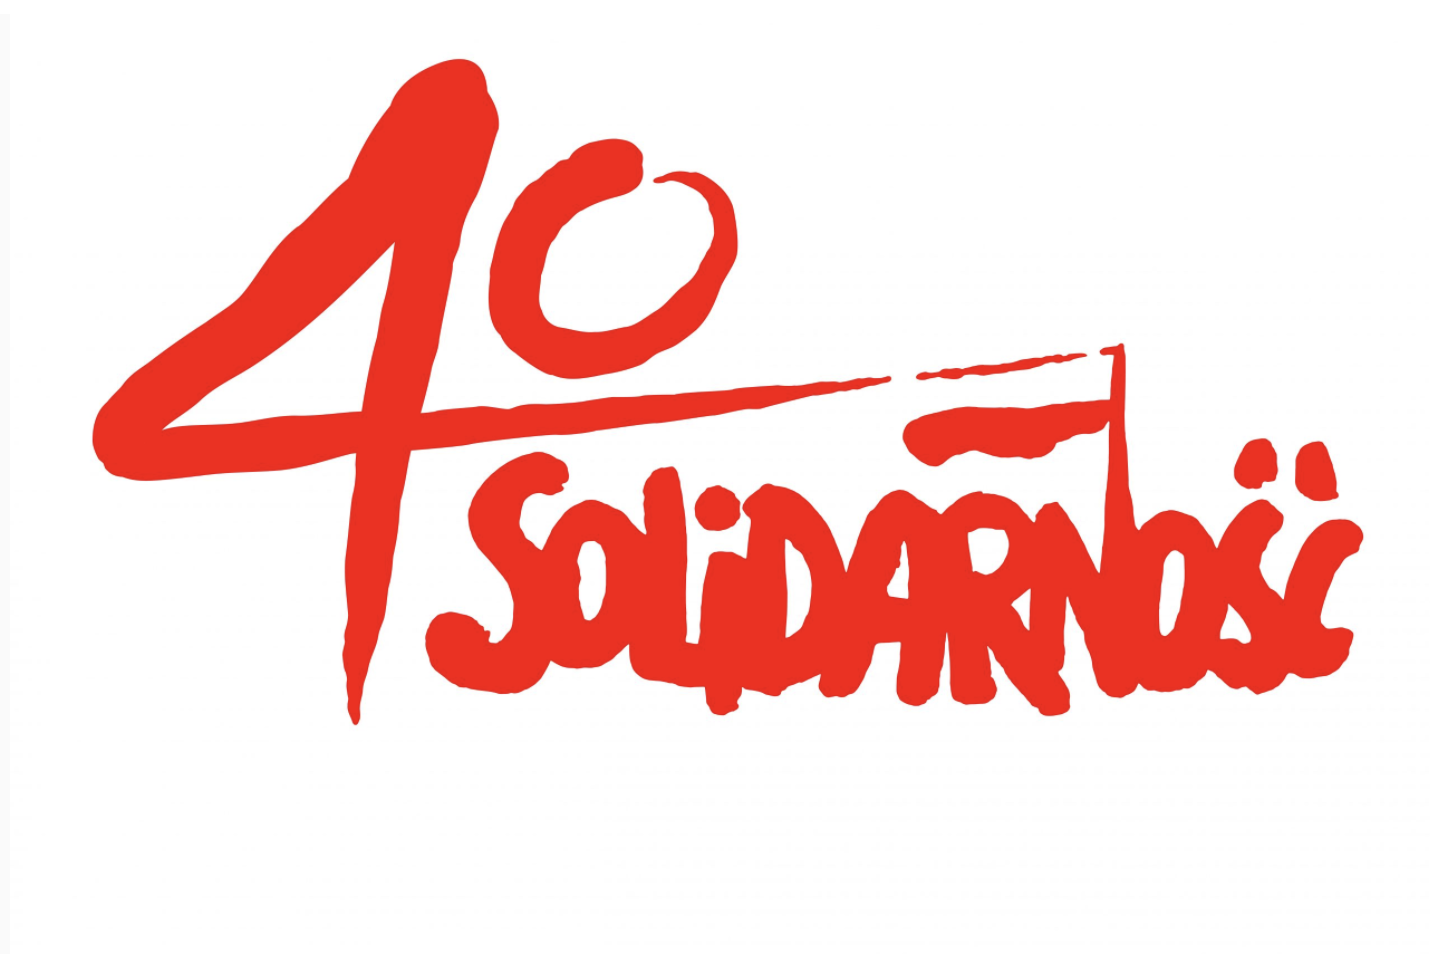 On August 30, 2020, we remembered the 40th anniversary of the signing of the August Solidarity Agreements and the 81st anniversary of the outbreak of World War II.